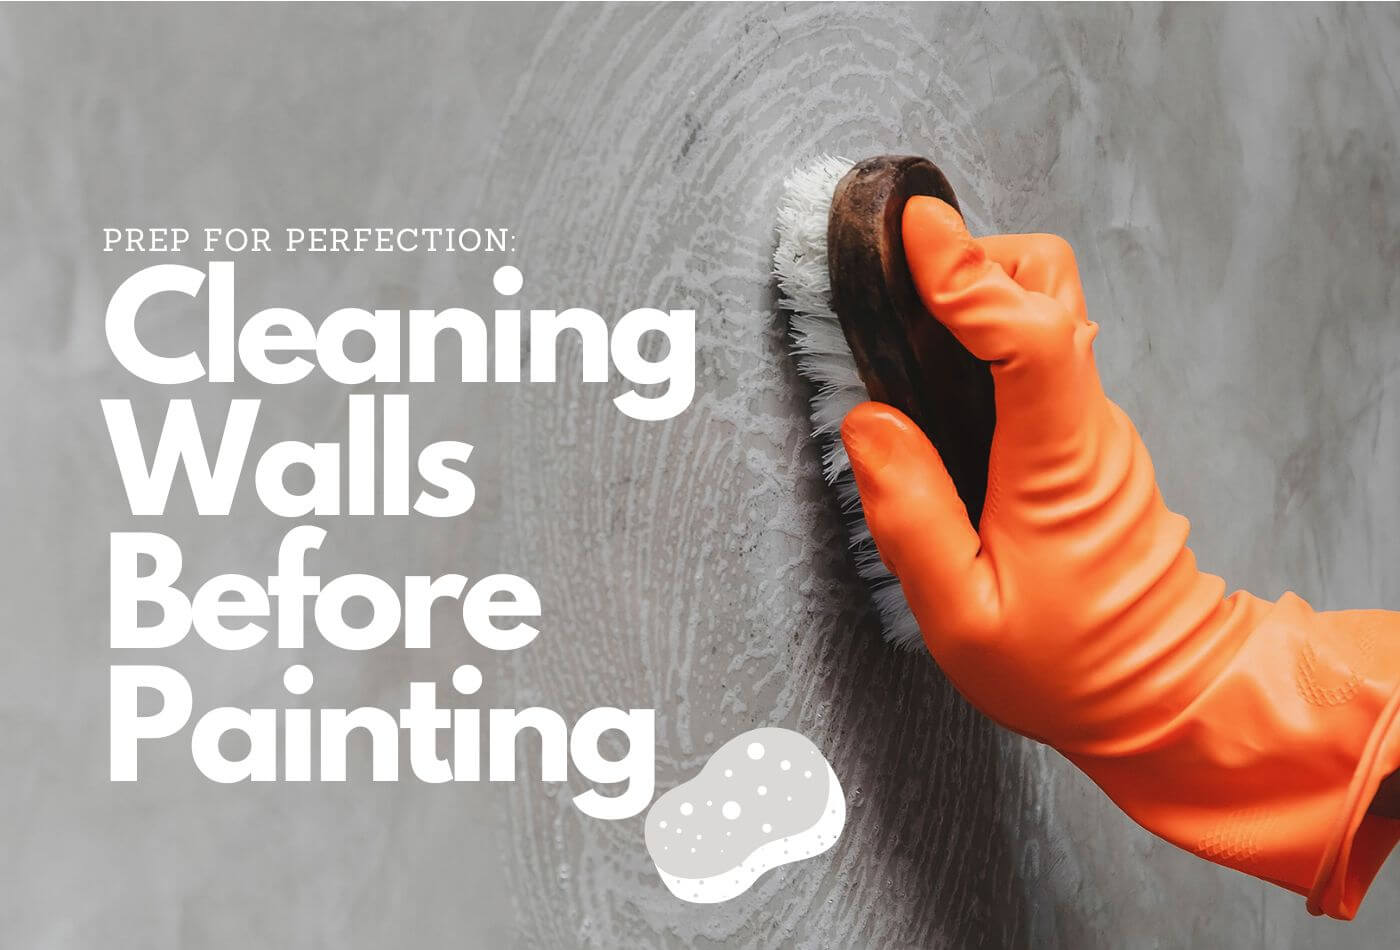 Prep For Perfection: Cleaning Your Walls Before Painting